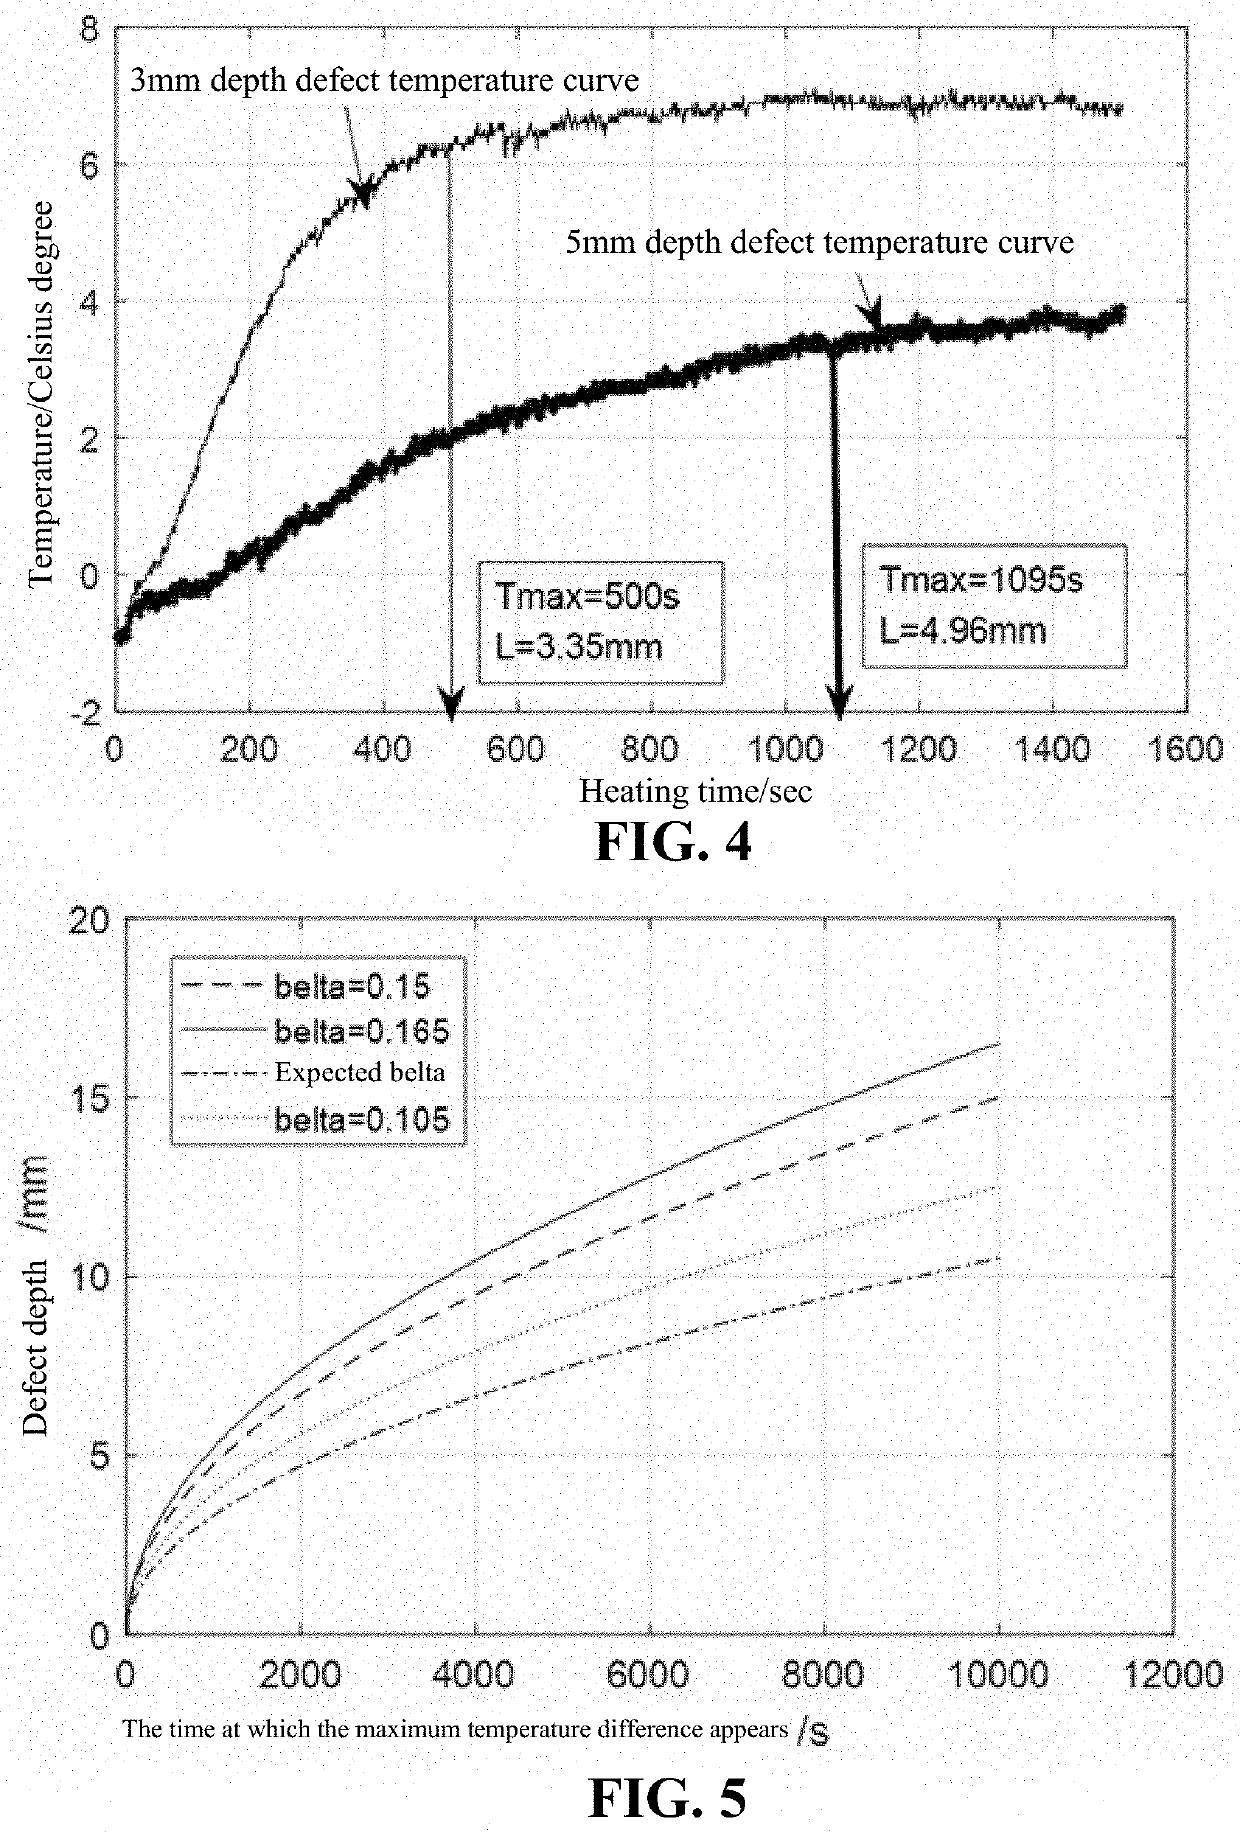 Method of measuring depth of defects in large-scale wind turbine blade using infrared thermography